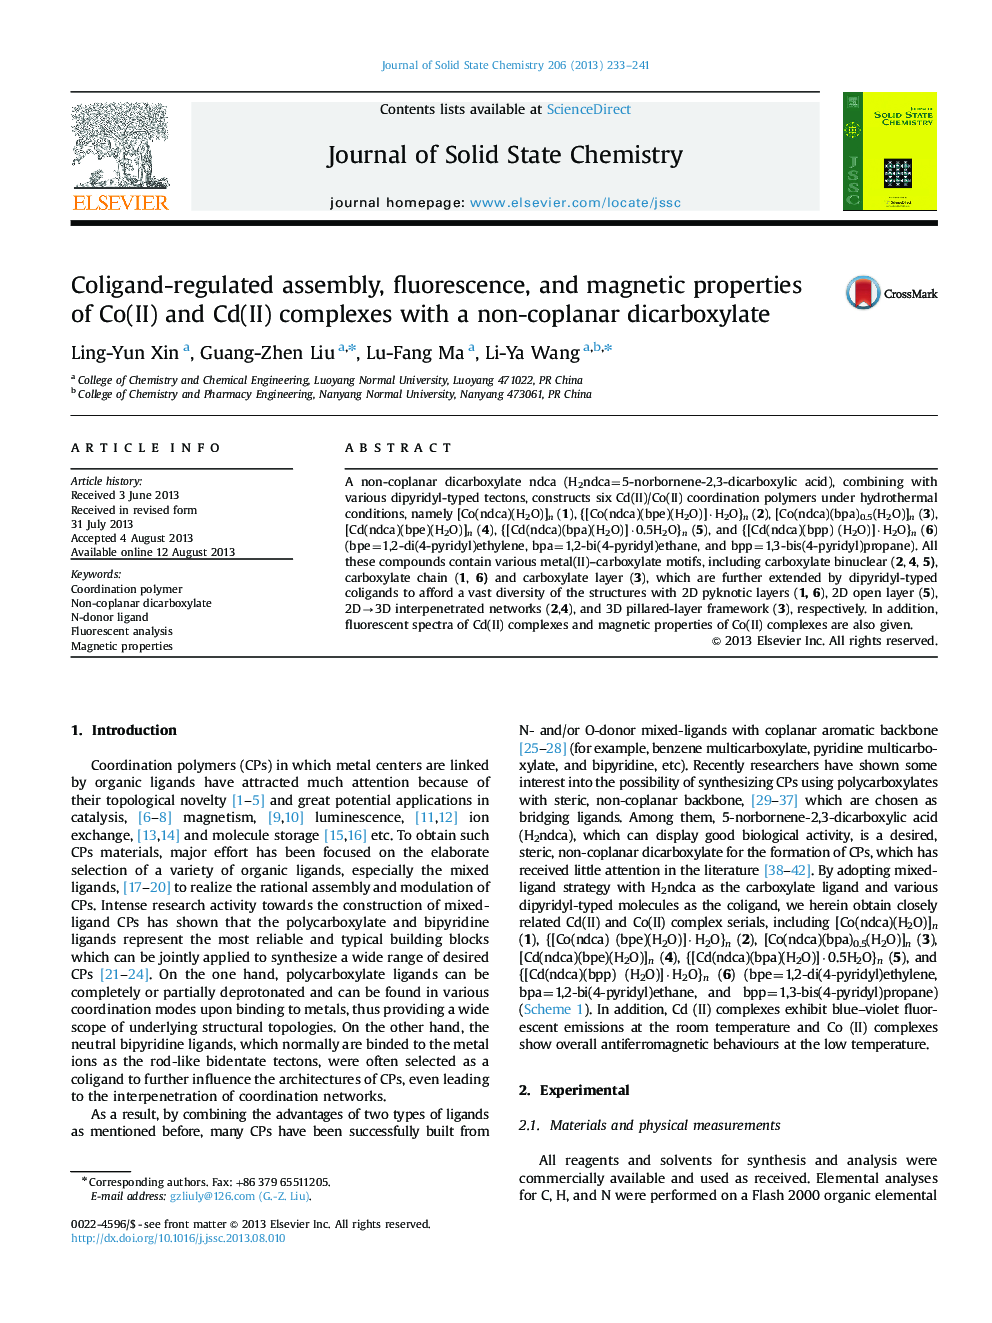 Coligand-regulated assembly, fluorescence, and magnetic properties of Co(II) and Cd(II) complexes with a non-coplanar dicarboxylate